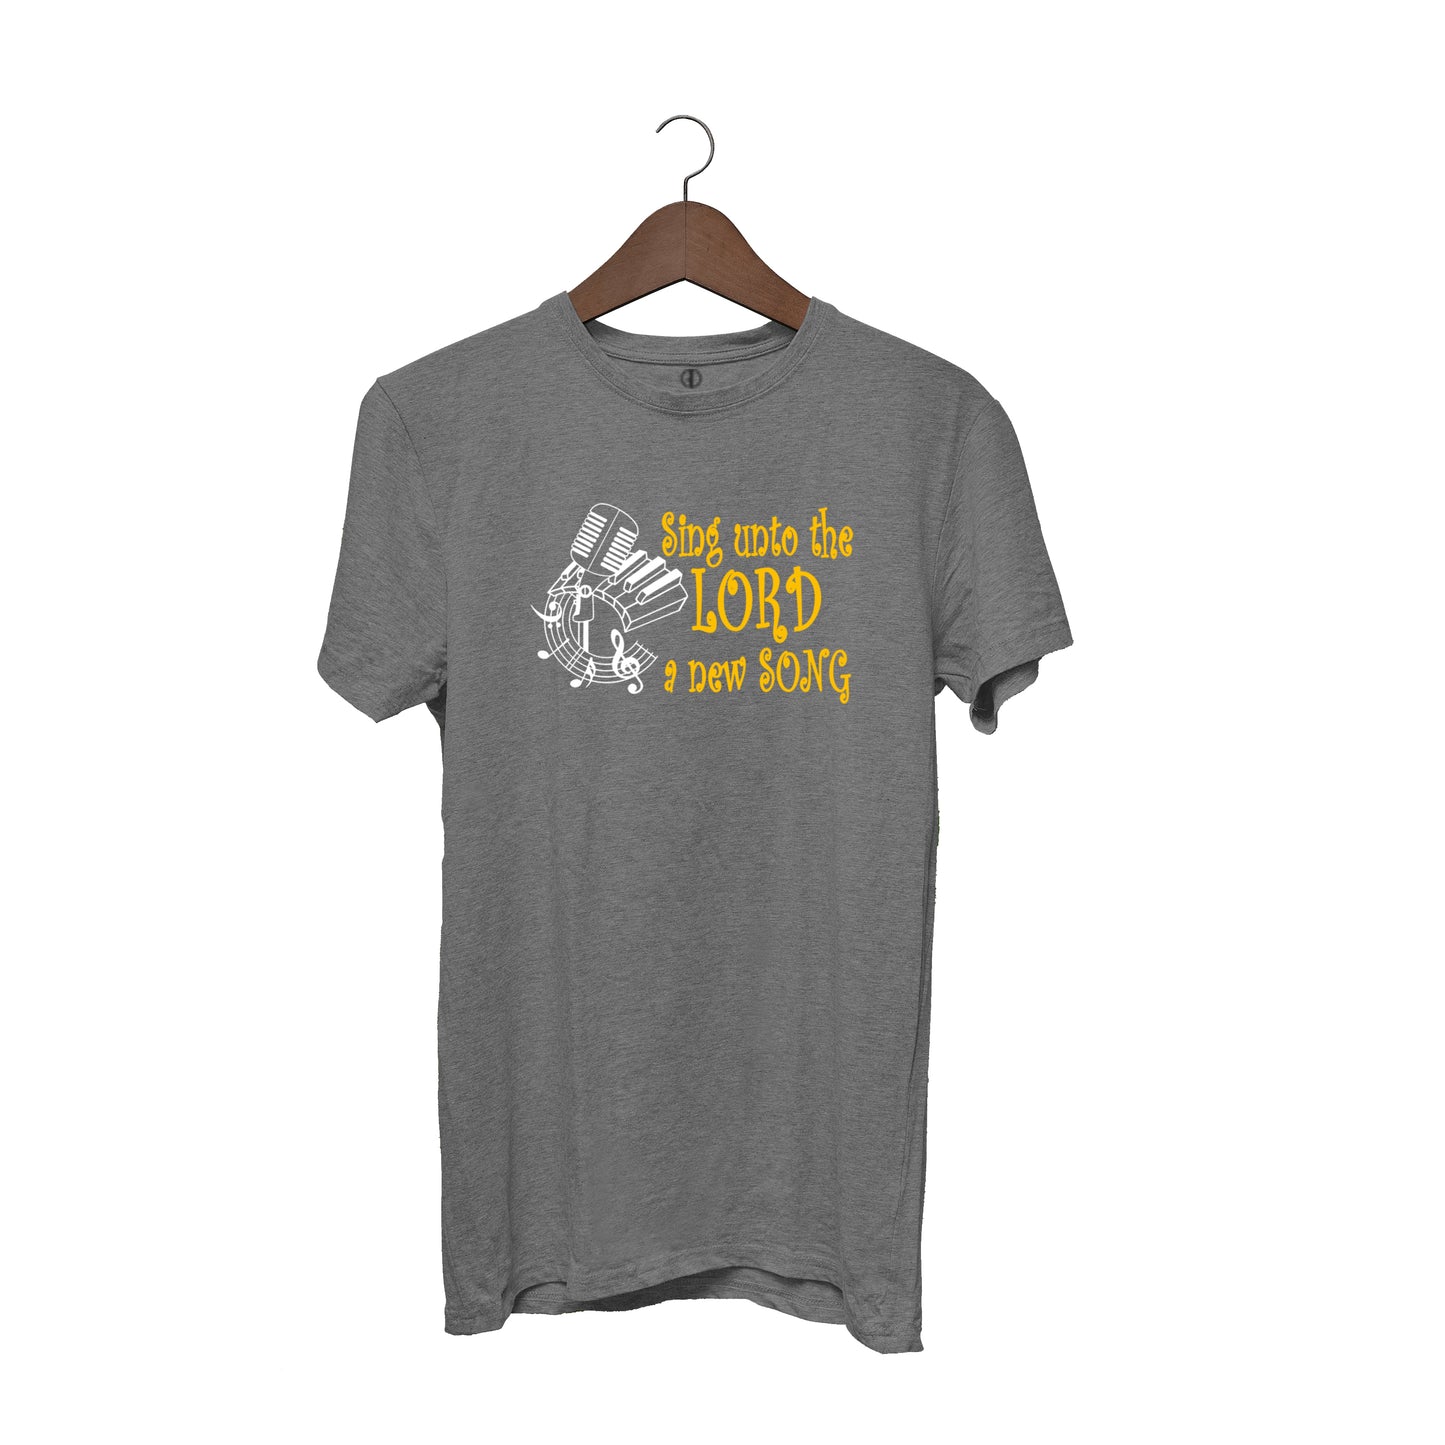 Sing unto the Lord - Men T-shirts